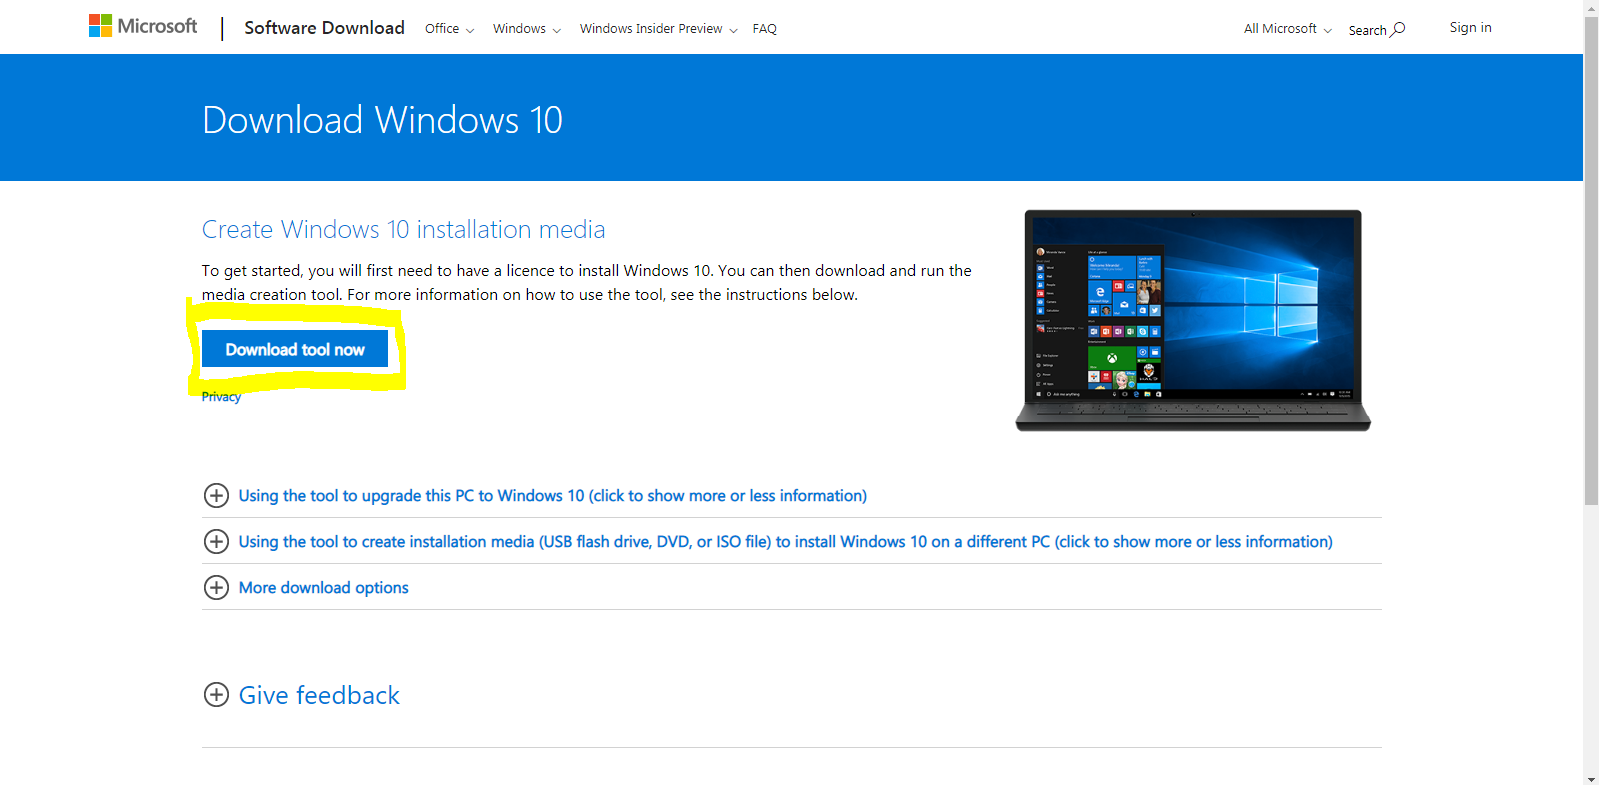 How to Download a Windows from the official website of Microsoft